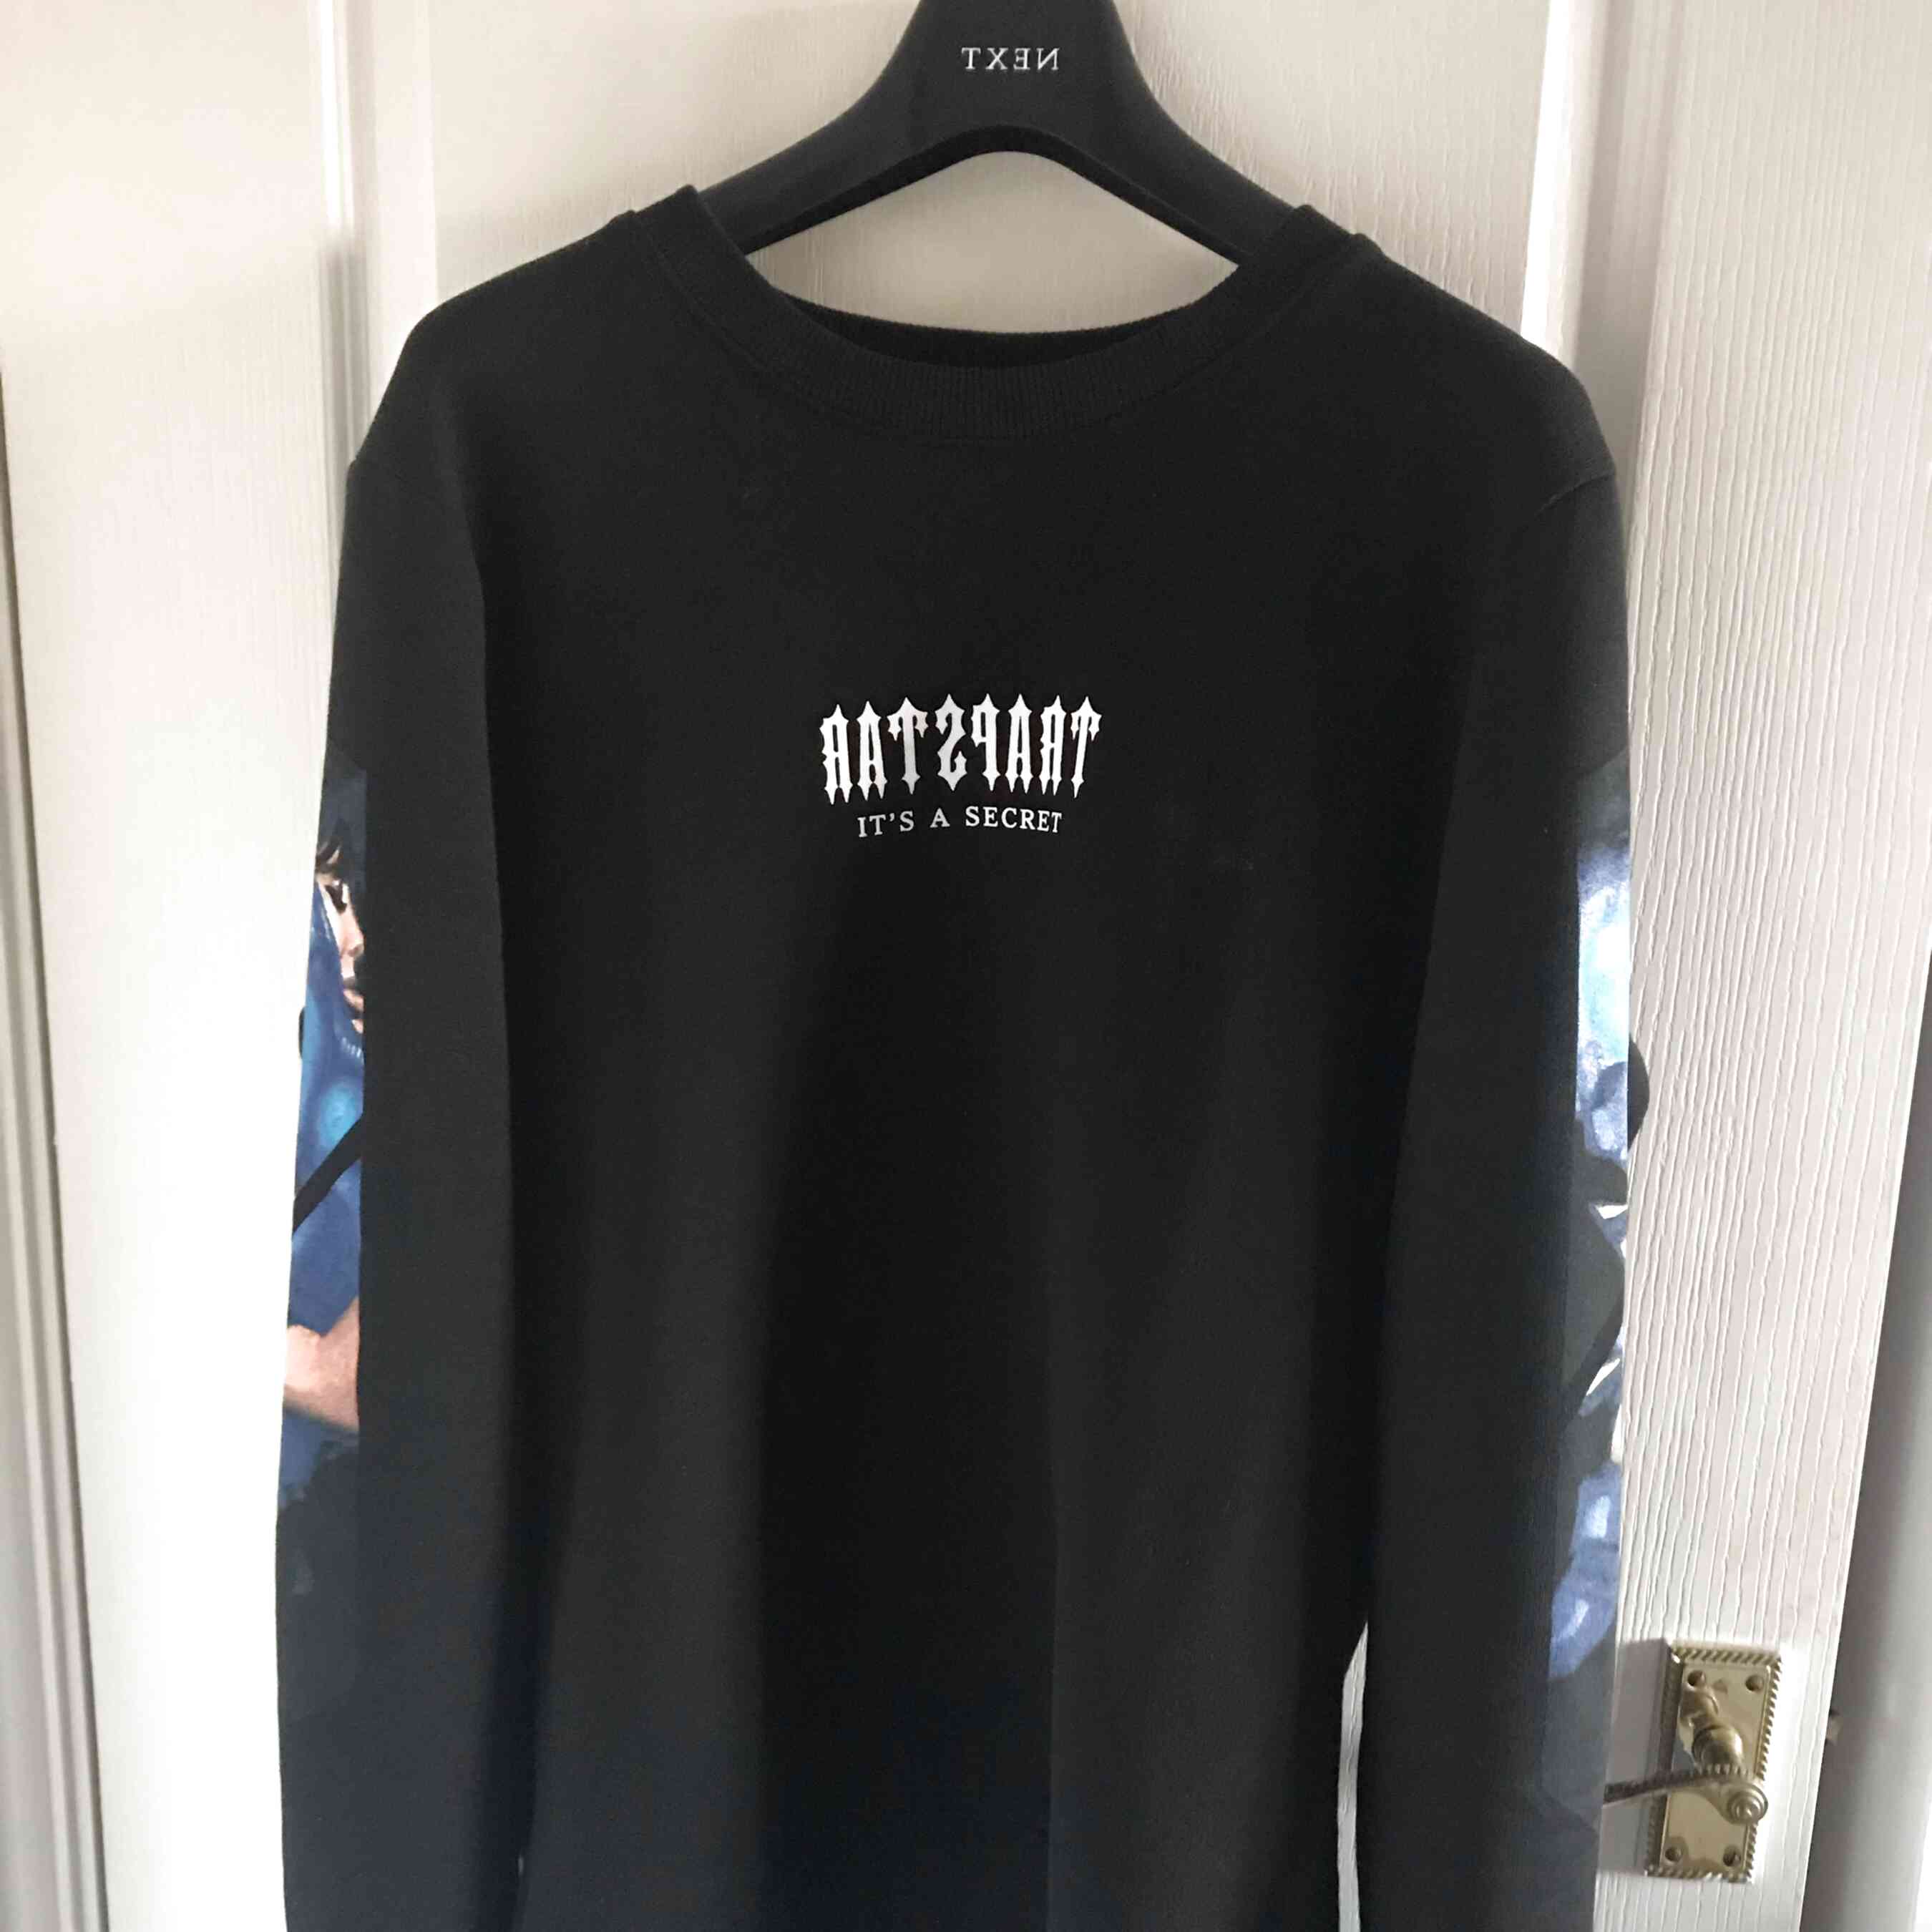 Trapstar Jumper for sale in UK | 30 used Trapstar Jumpers